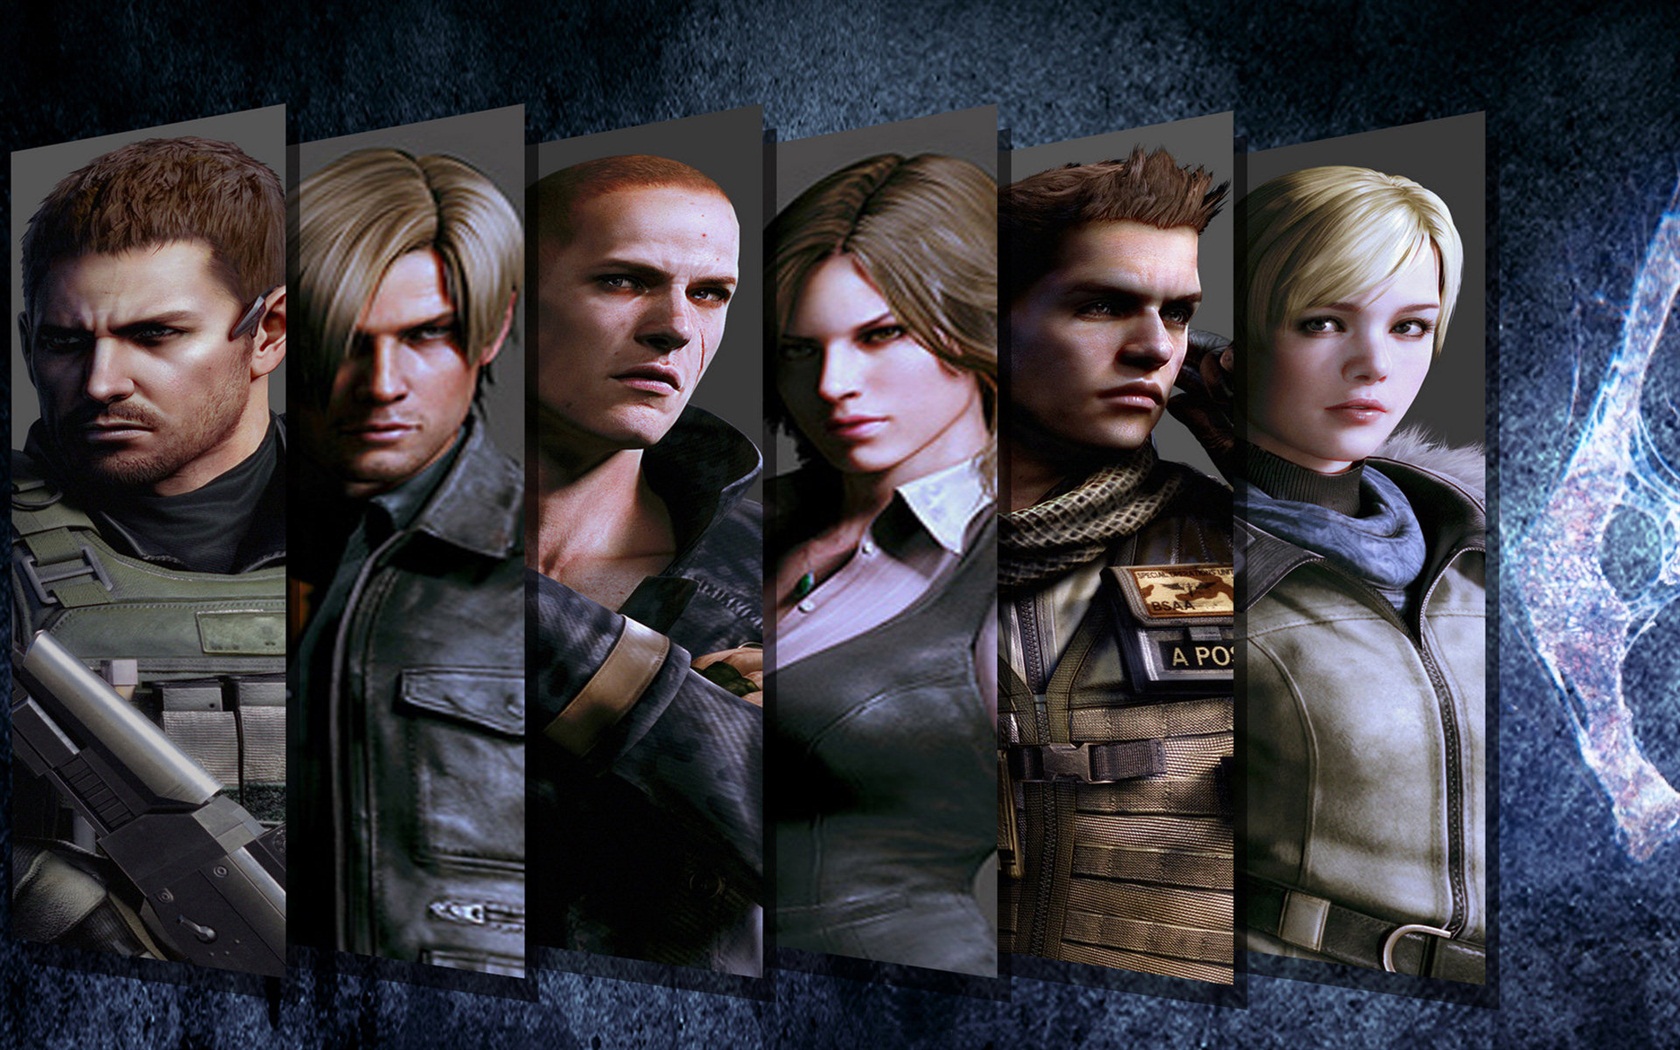 Resident Evil 6 HD game wallpapers #2 - 1680x1050